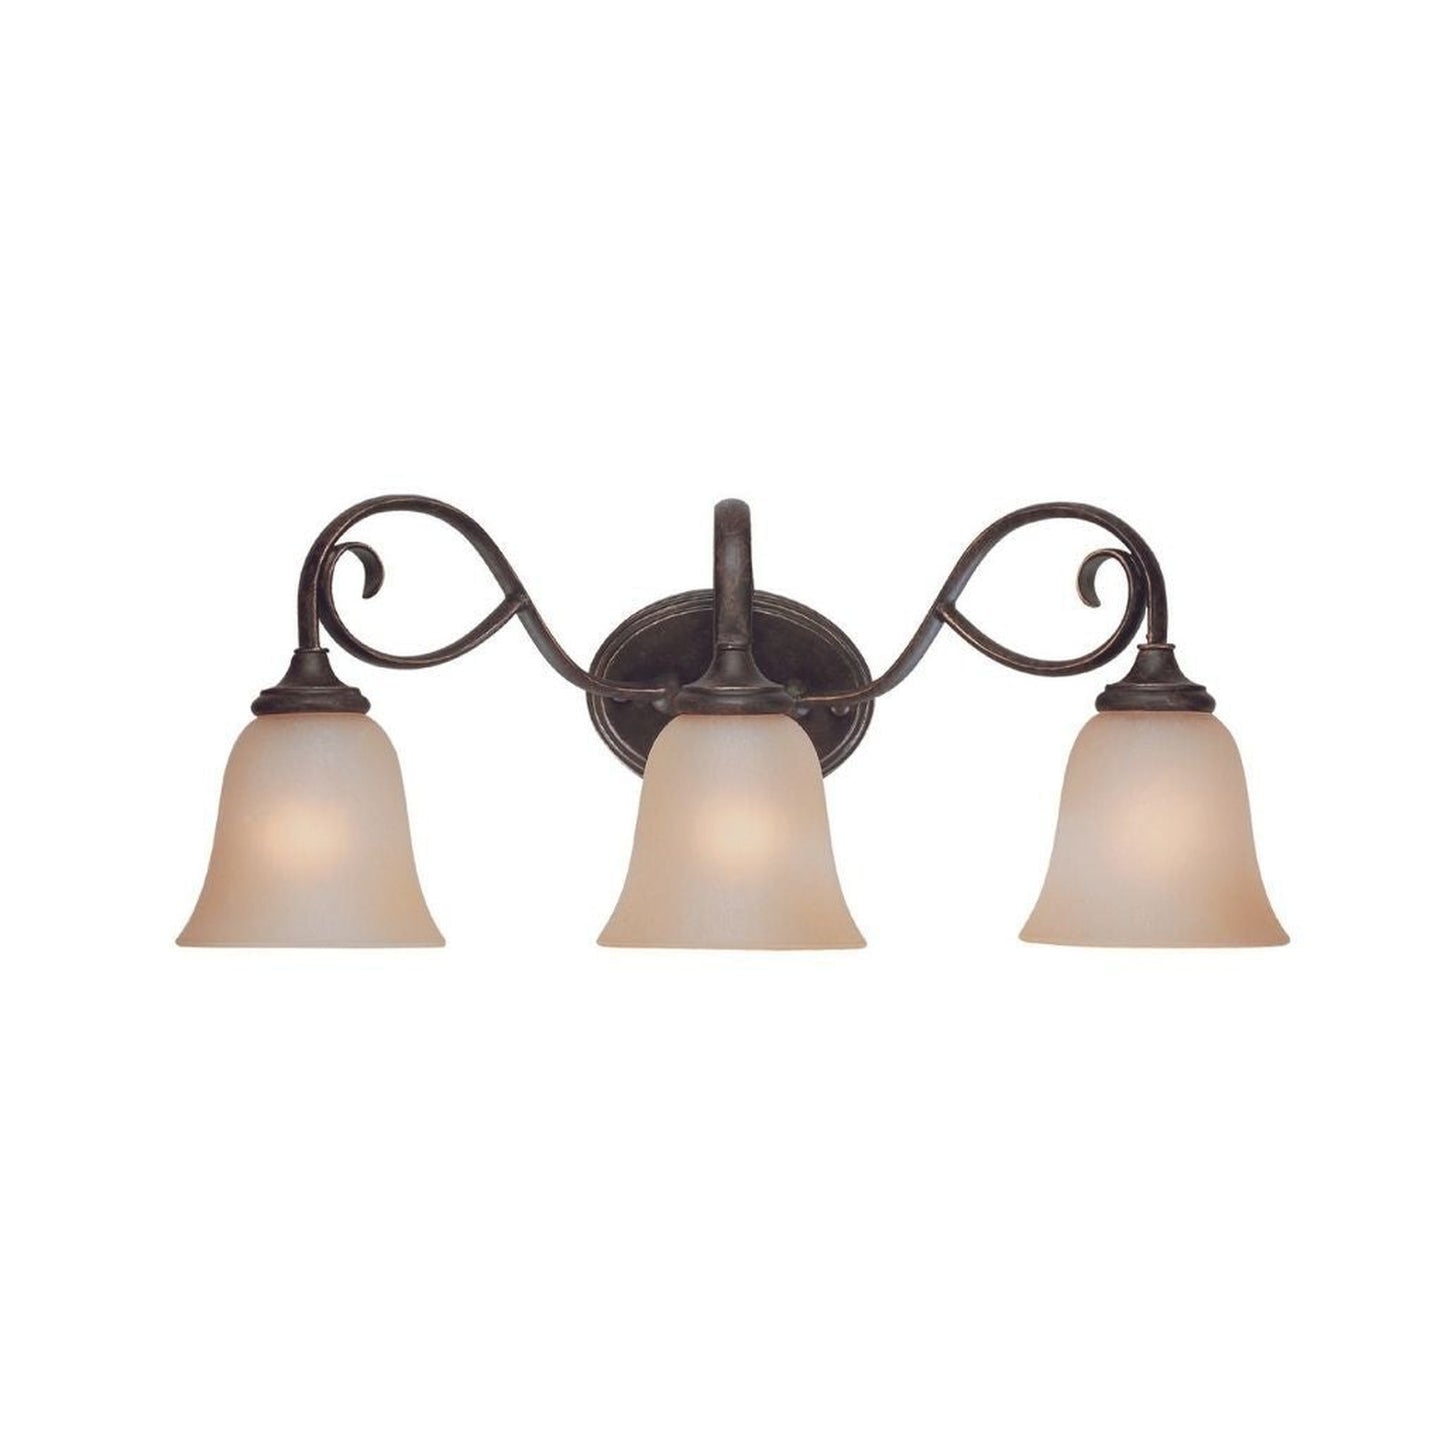 Craftmade Barrett Place 24" 3-Light Mocha Bronze Vanity Light With Light Umber Etched Glass Shades